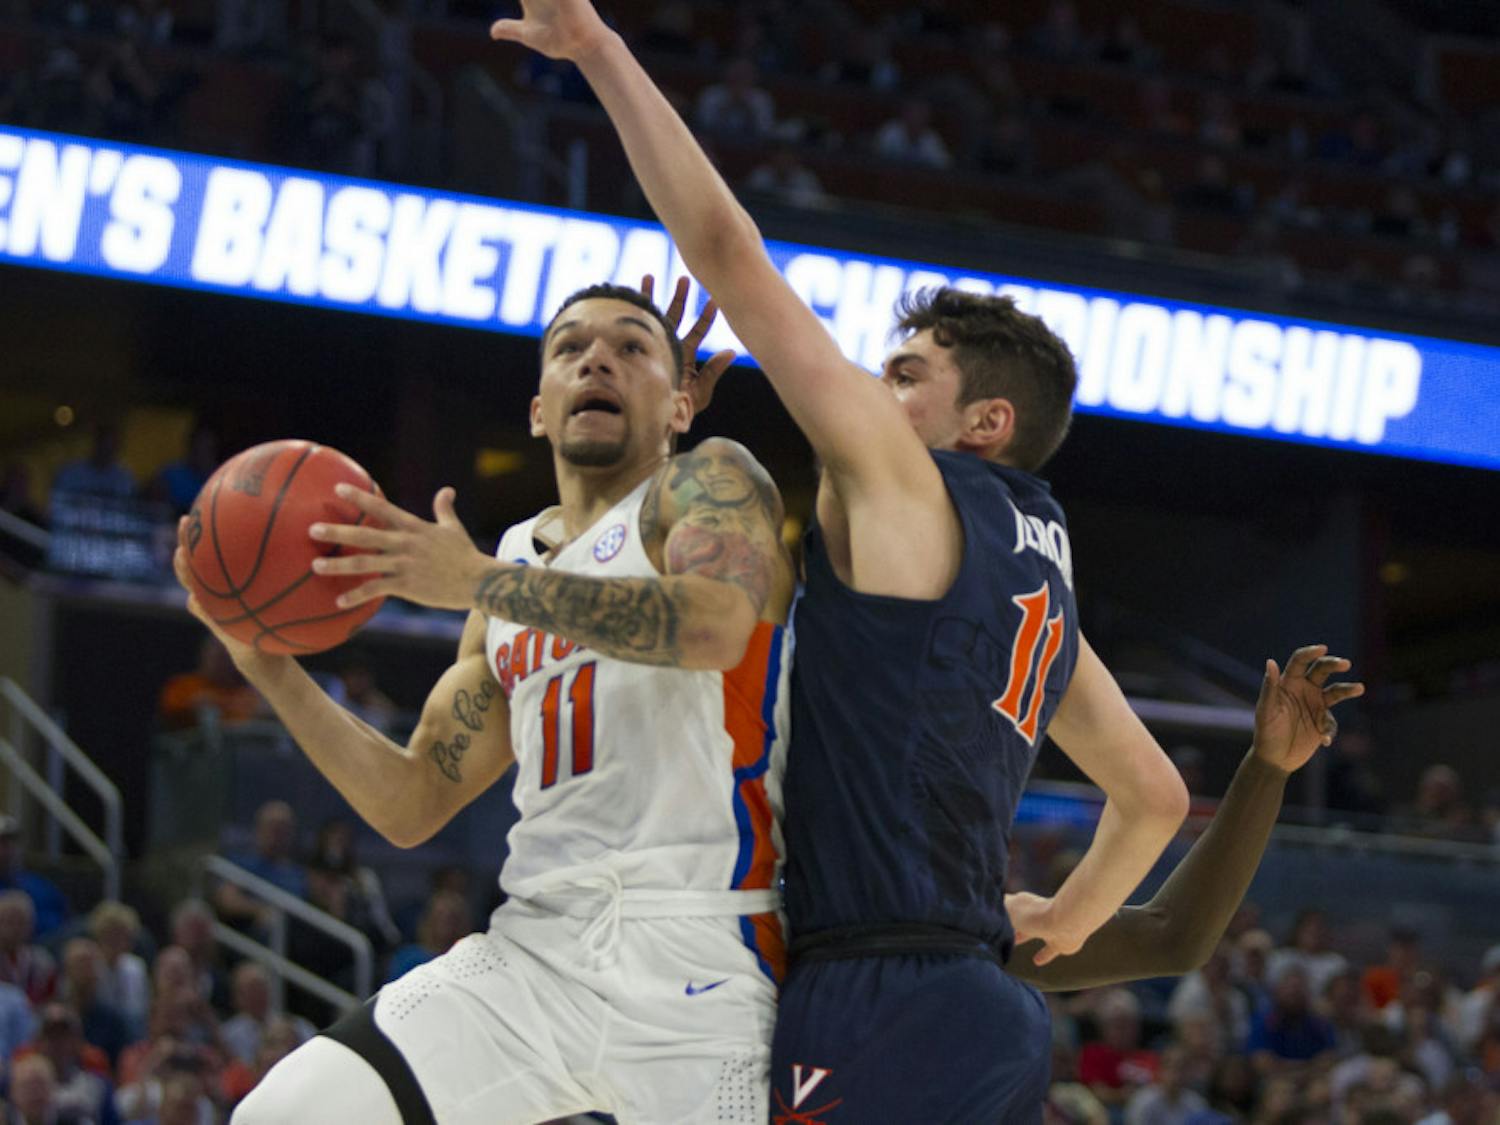 Point guard Chris Chiozza shoots a contested layup in Florida's 65-39 win over Virginia in the Round of 32 in the NCAA Tournament on Saturday in Orlando. 